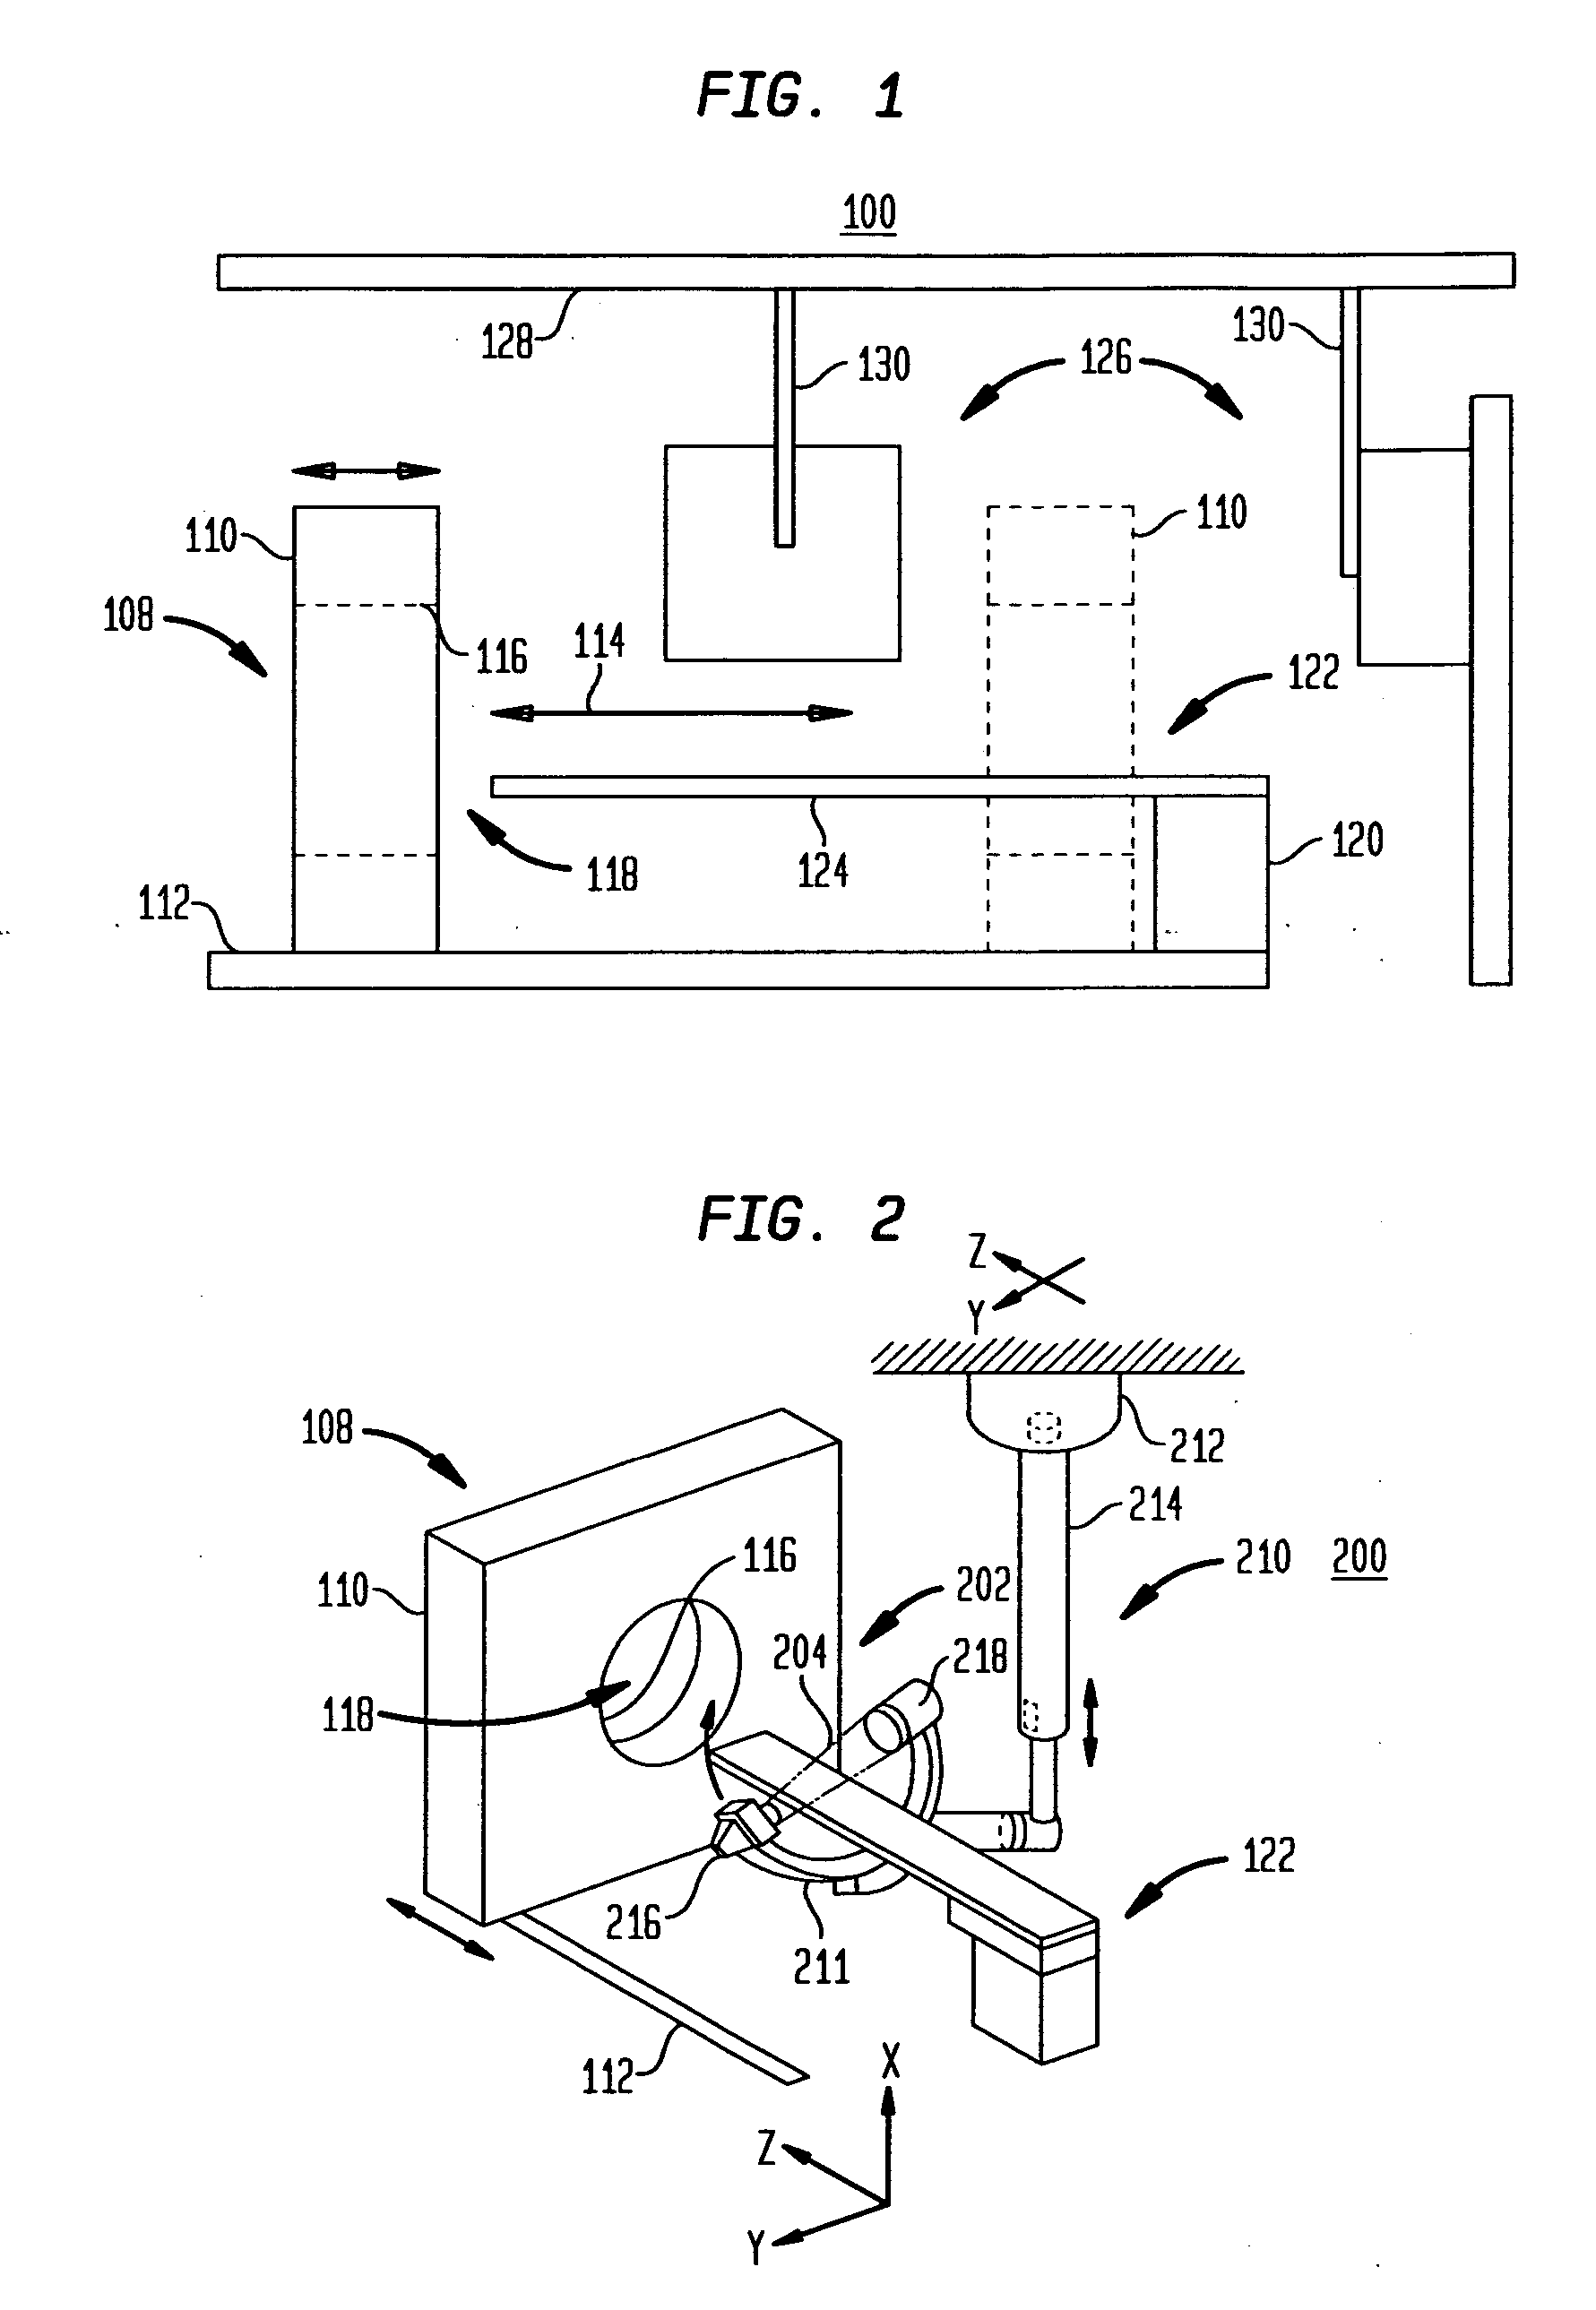 Separate and combined multi-modality diagnostic imaging system